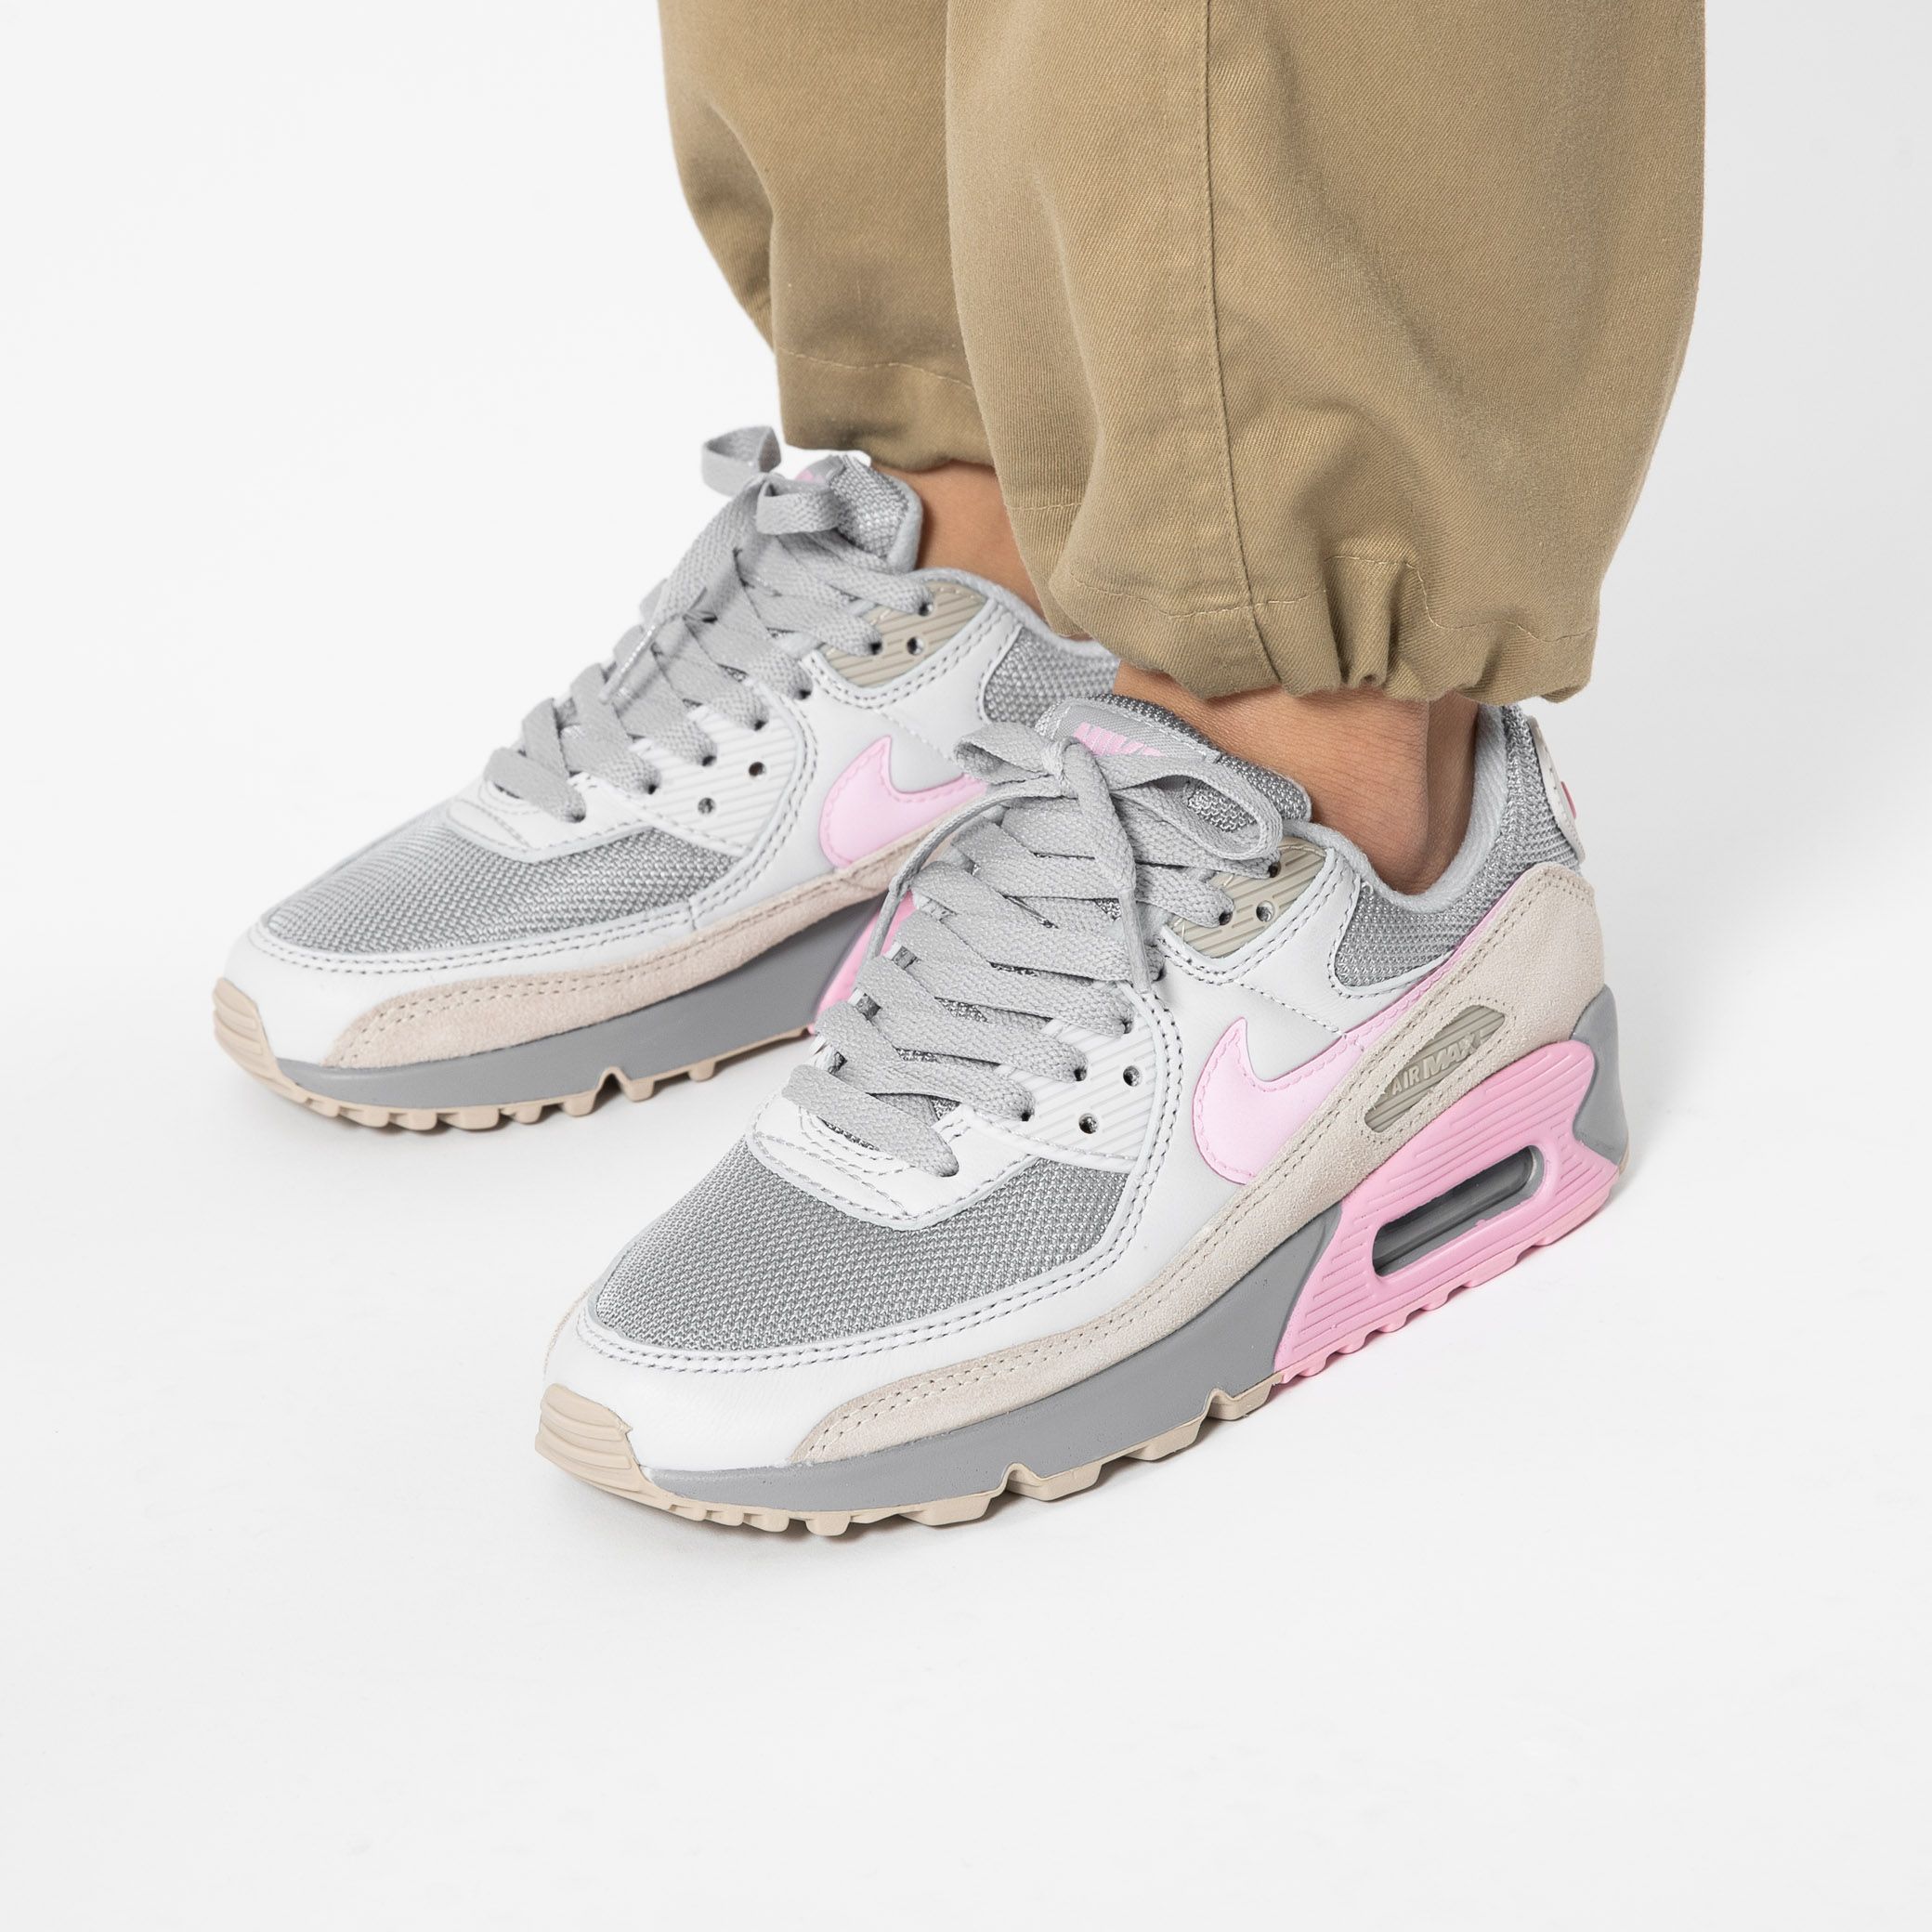 Titolo on Twitter: "catch the latest Air Max 90 in "Vast Grey/Pink" ➡︎  https://t.co/T5Ttj1wEBr US 4 (36) - US 10.5 (44.5) style code 🔎 CW7483-001  #titolo #titoloSHOP #nike #am90 #airmax #airmax90 https://t.co/8buxn9jAhn" /